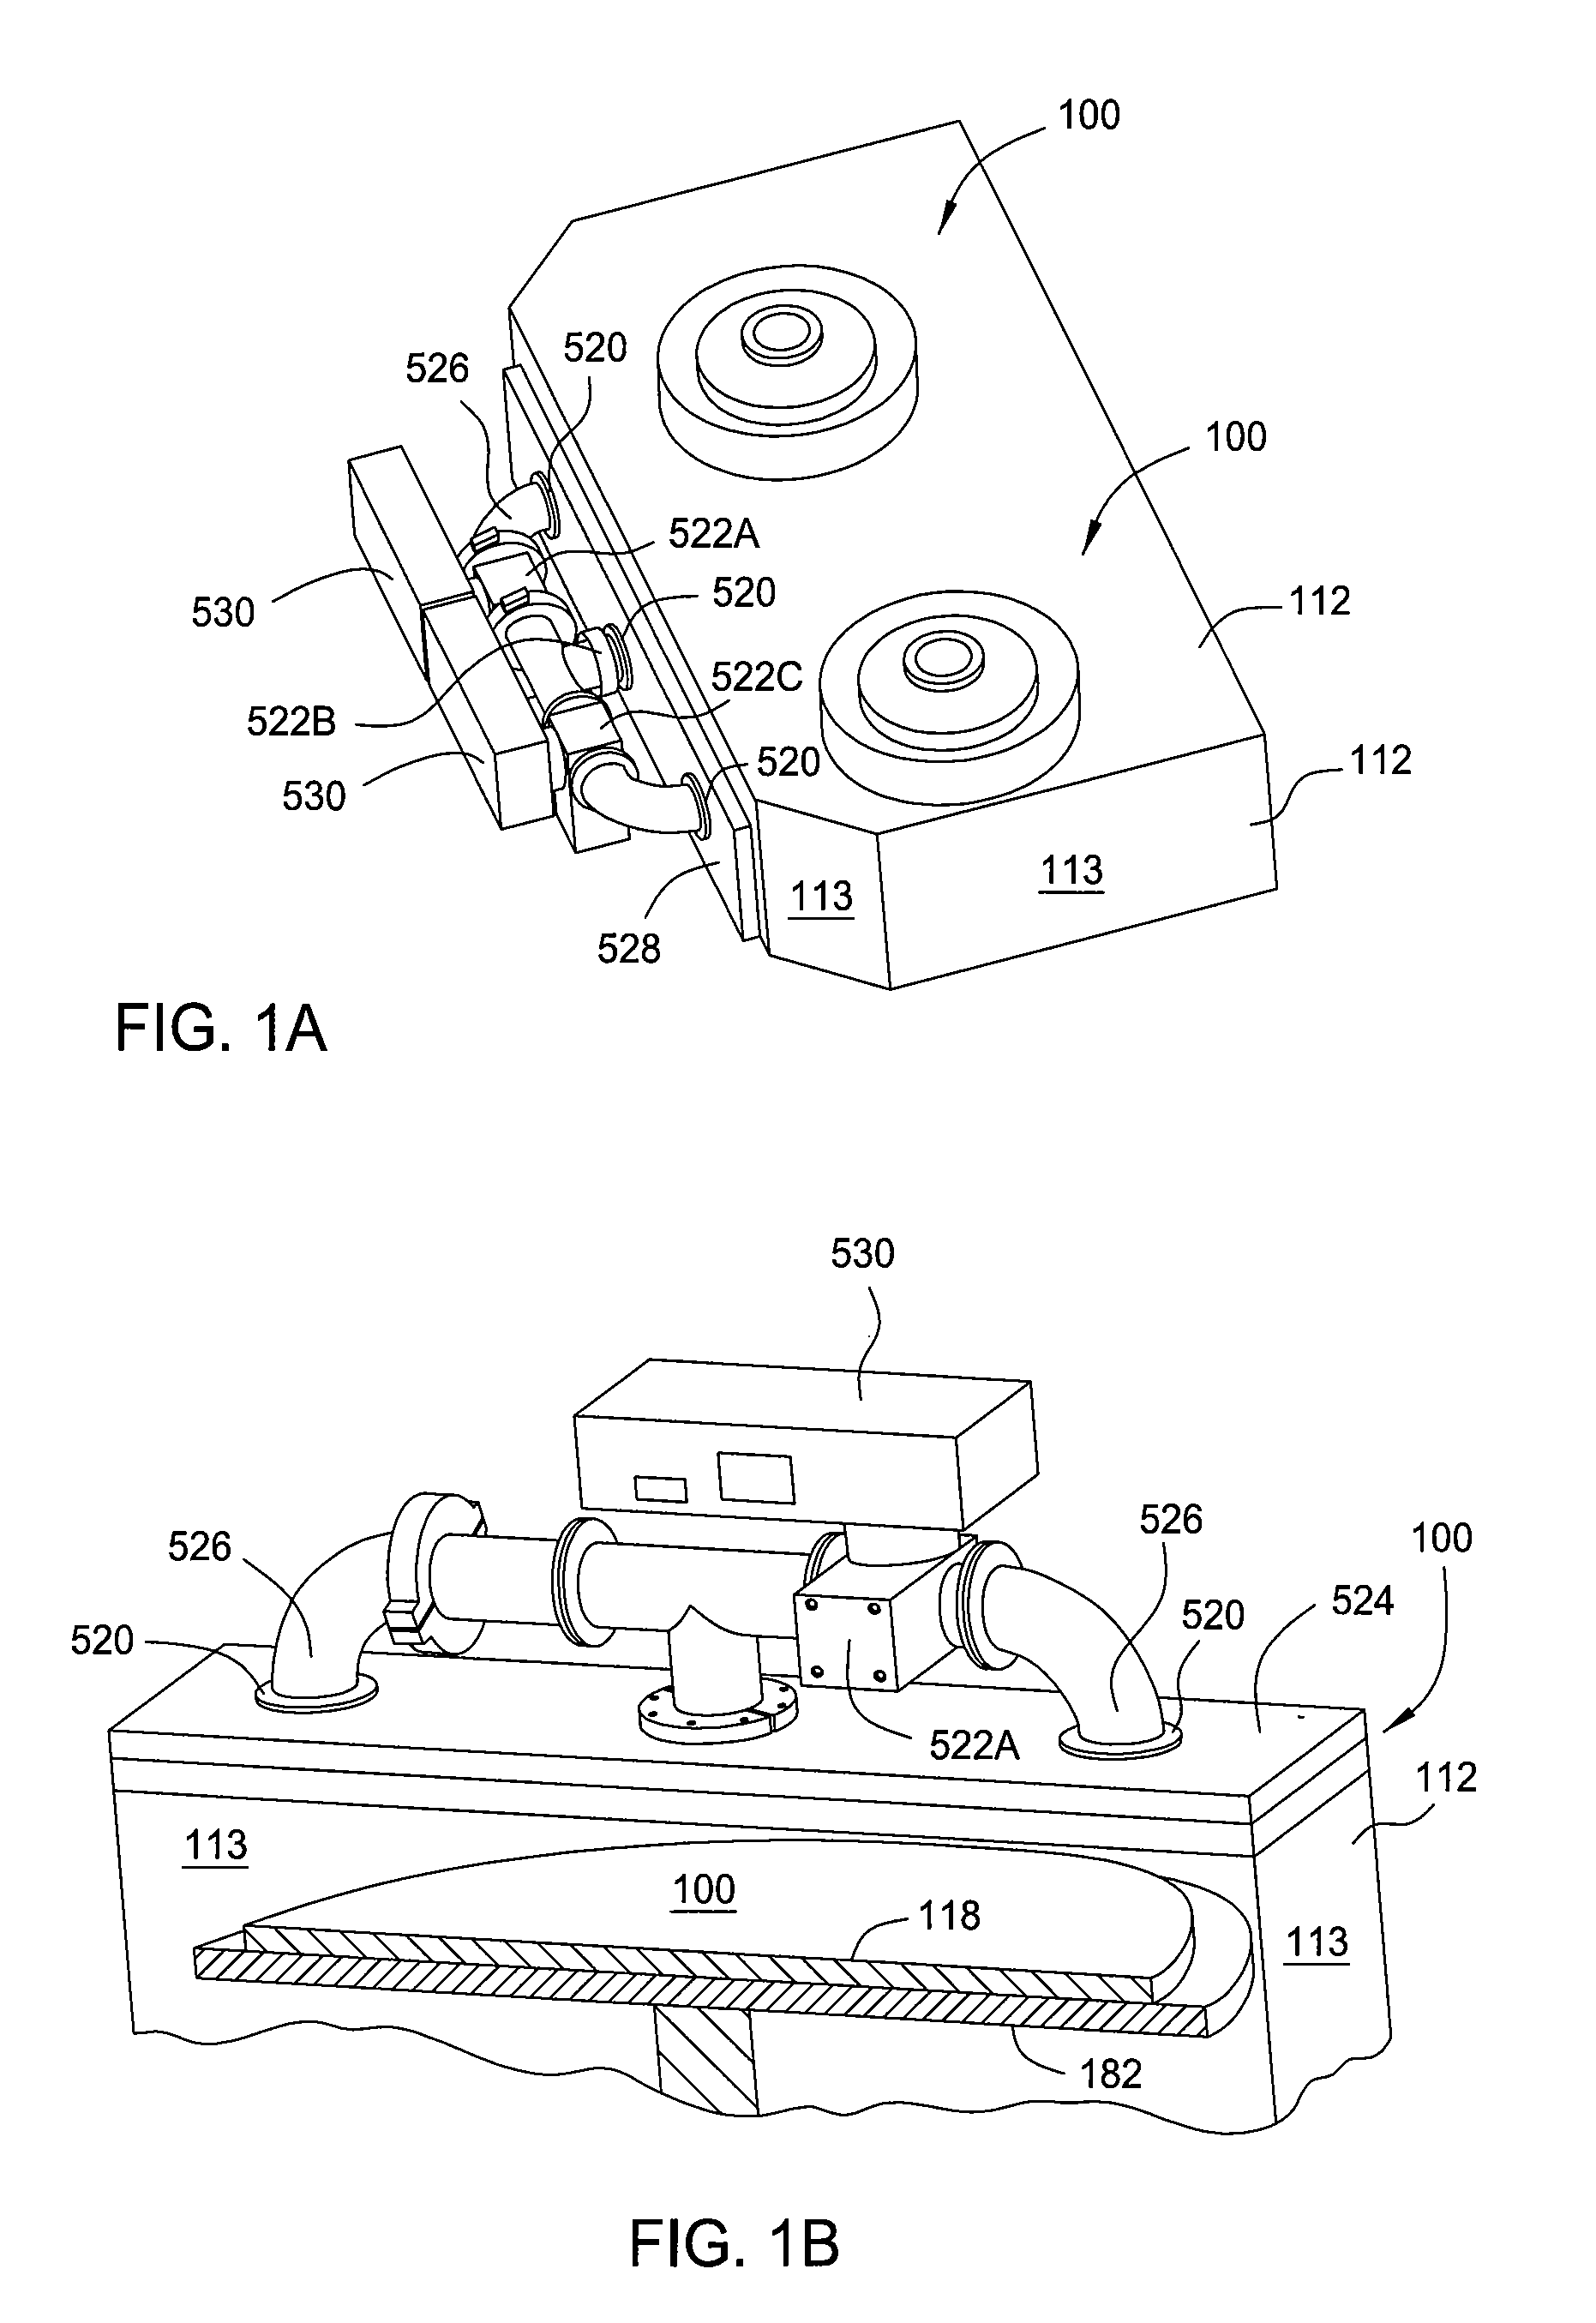 Methods of end point detection for substrate fabrication processes